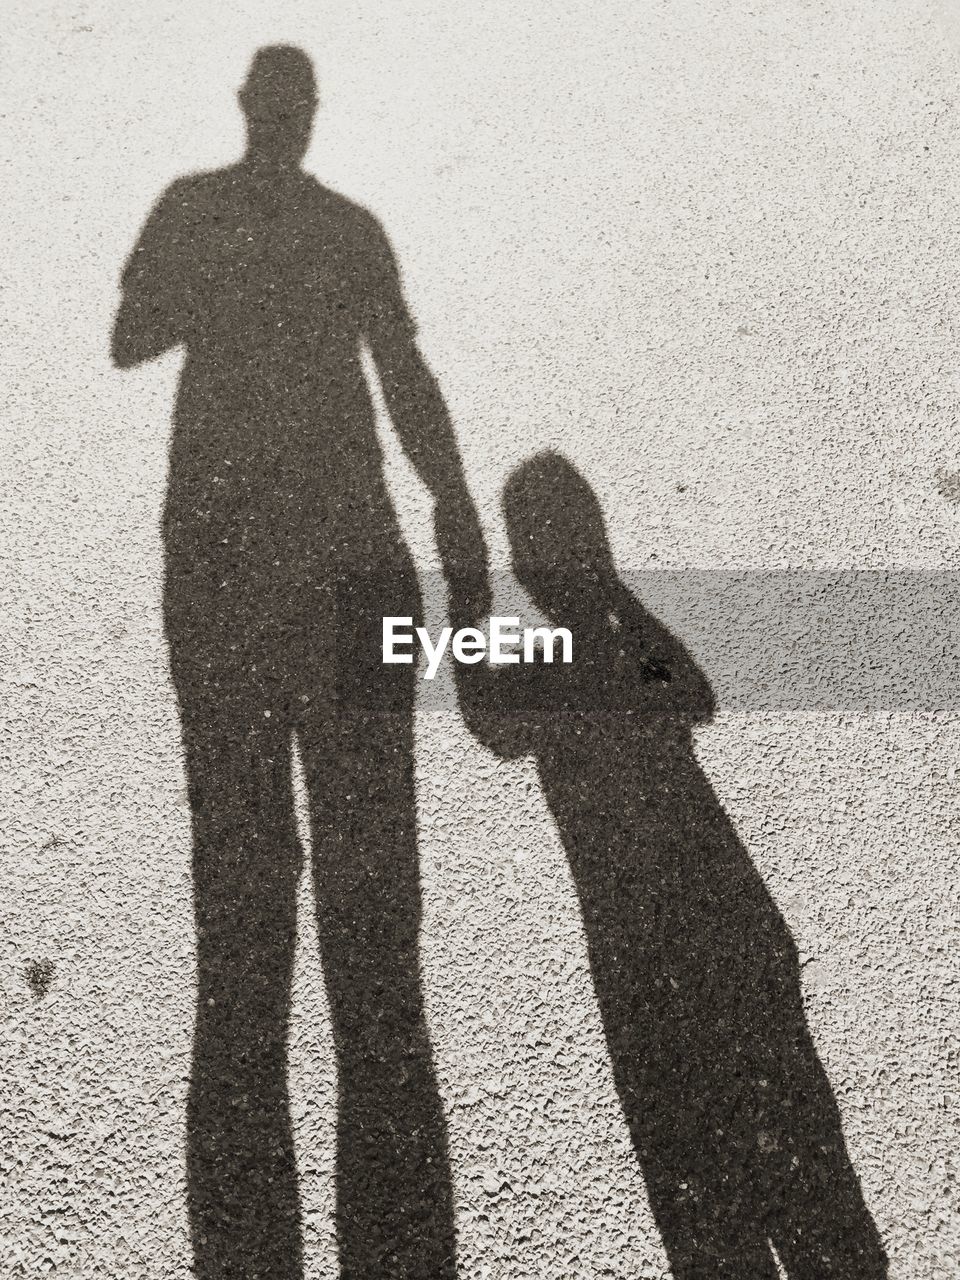 Shadow of father and son on road